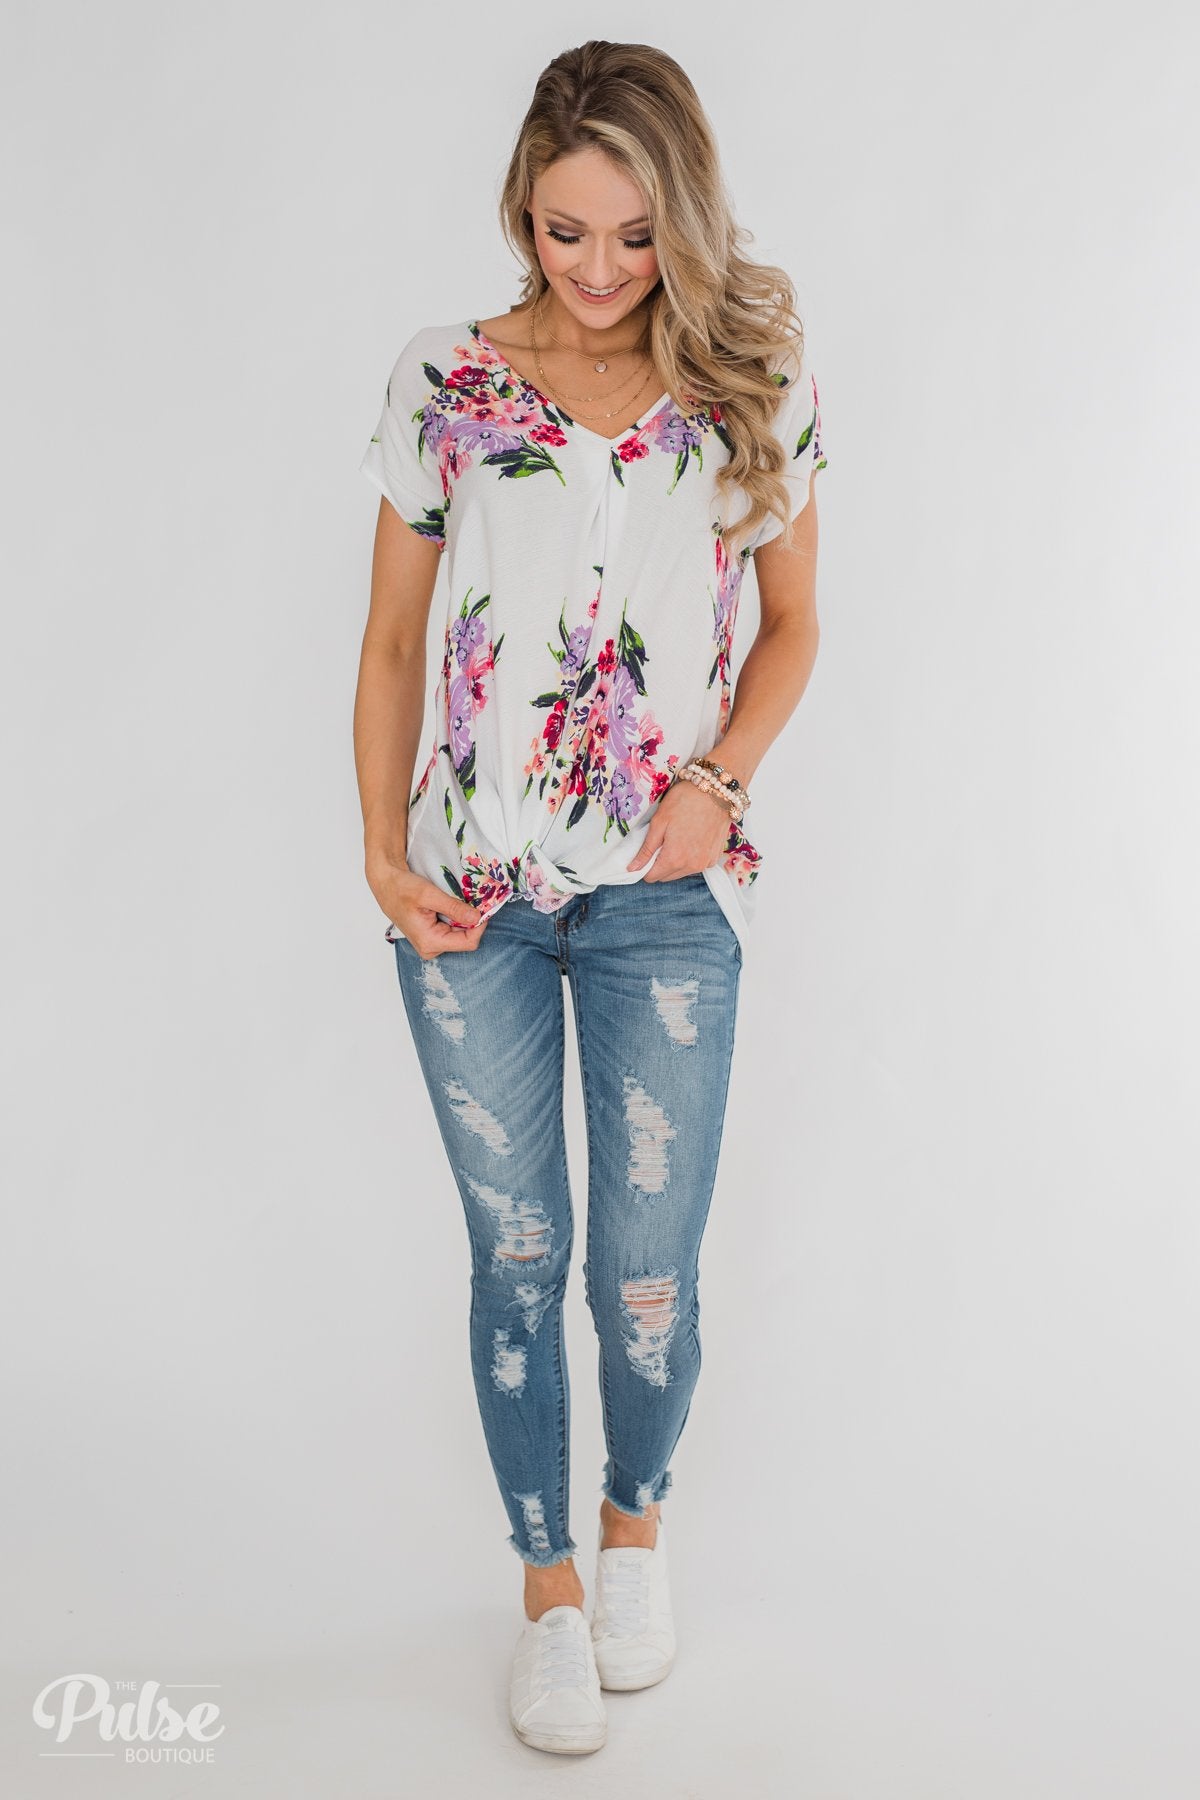 Best Day Ever Floral Twist Short Sleeve Top- Ivory